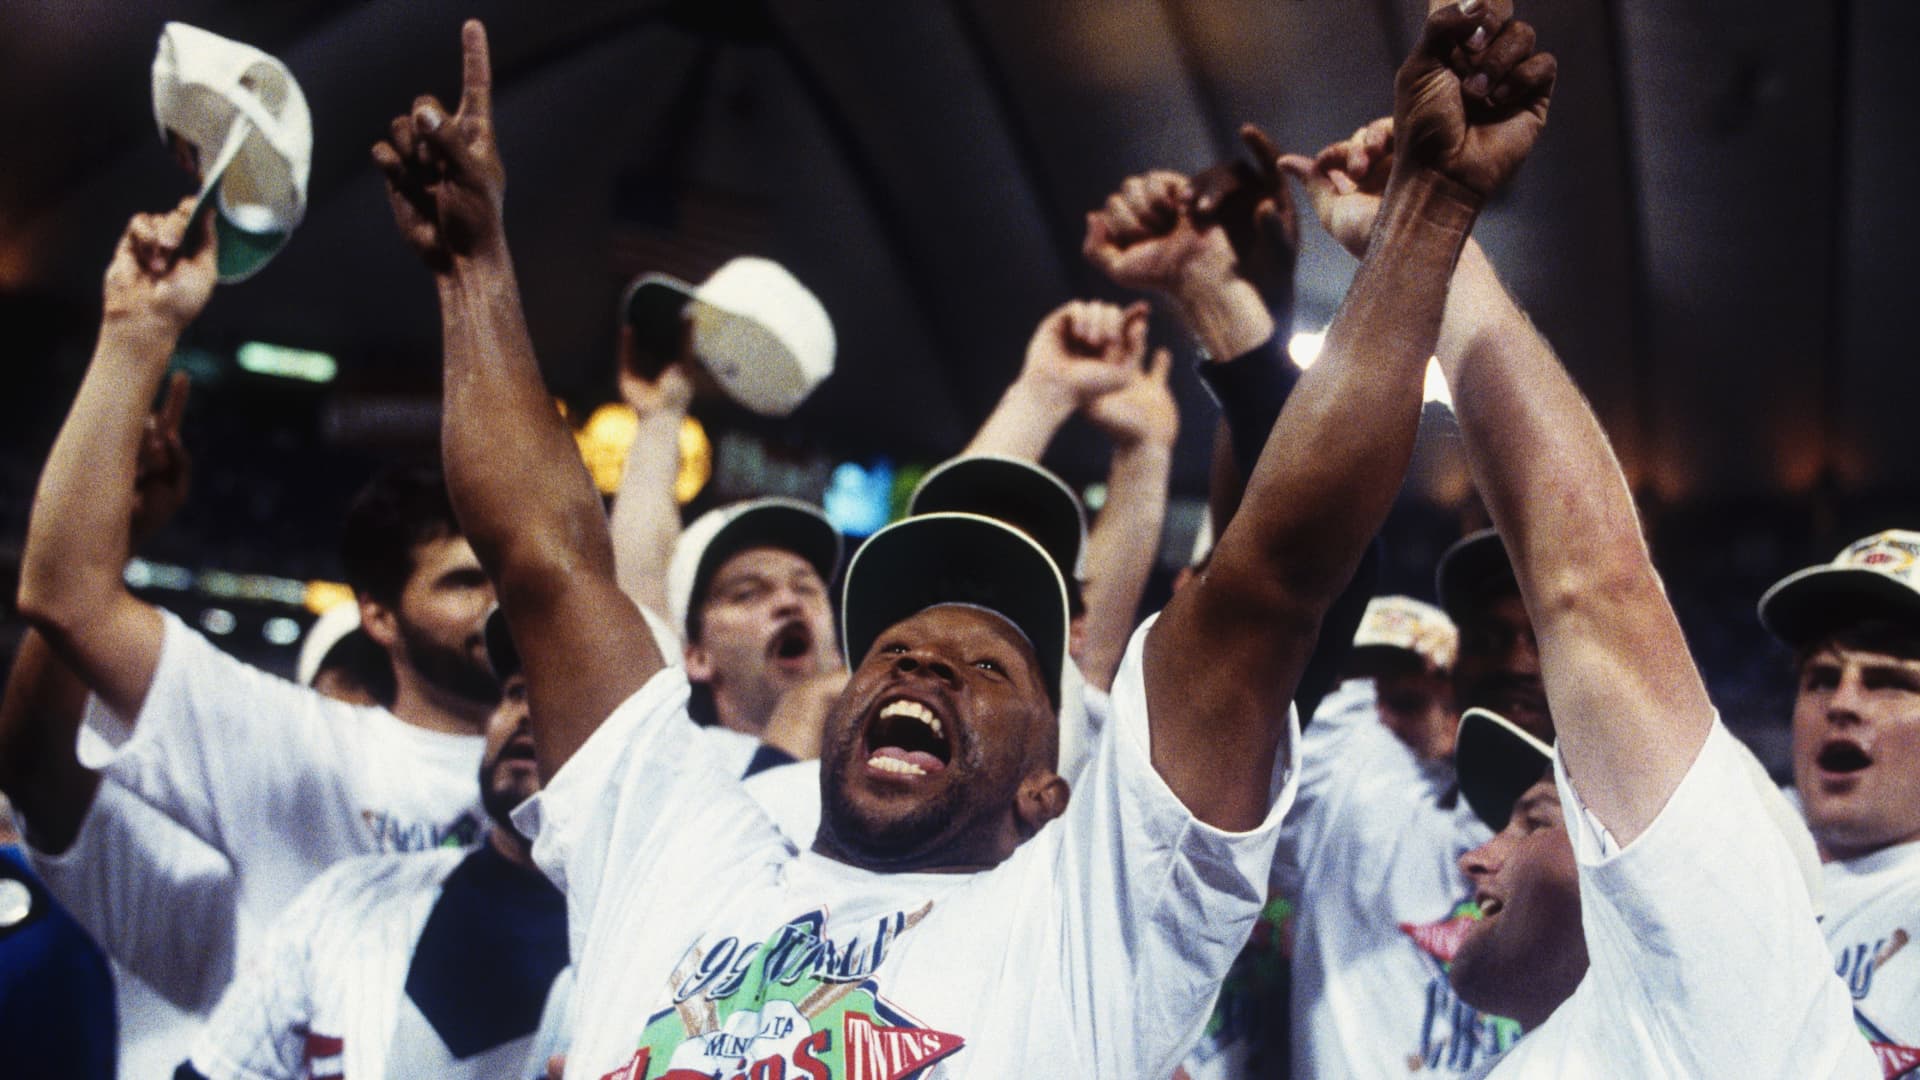 Outfielder Kirby Puckett #34 of the Minnesota Twins leads the cheers during the celebration after winning Game Seven of the World Series against the Atlanta Braves at the Metrodome on October 27, 1991 in Minneapolis, Minnesota.